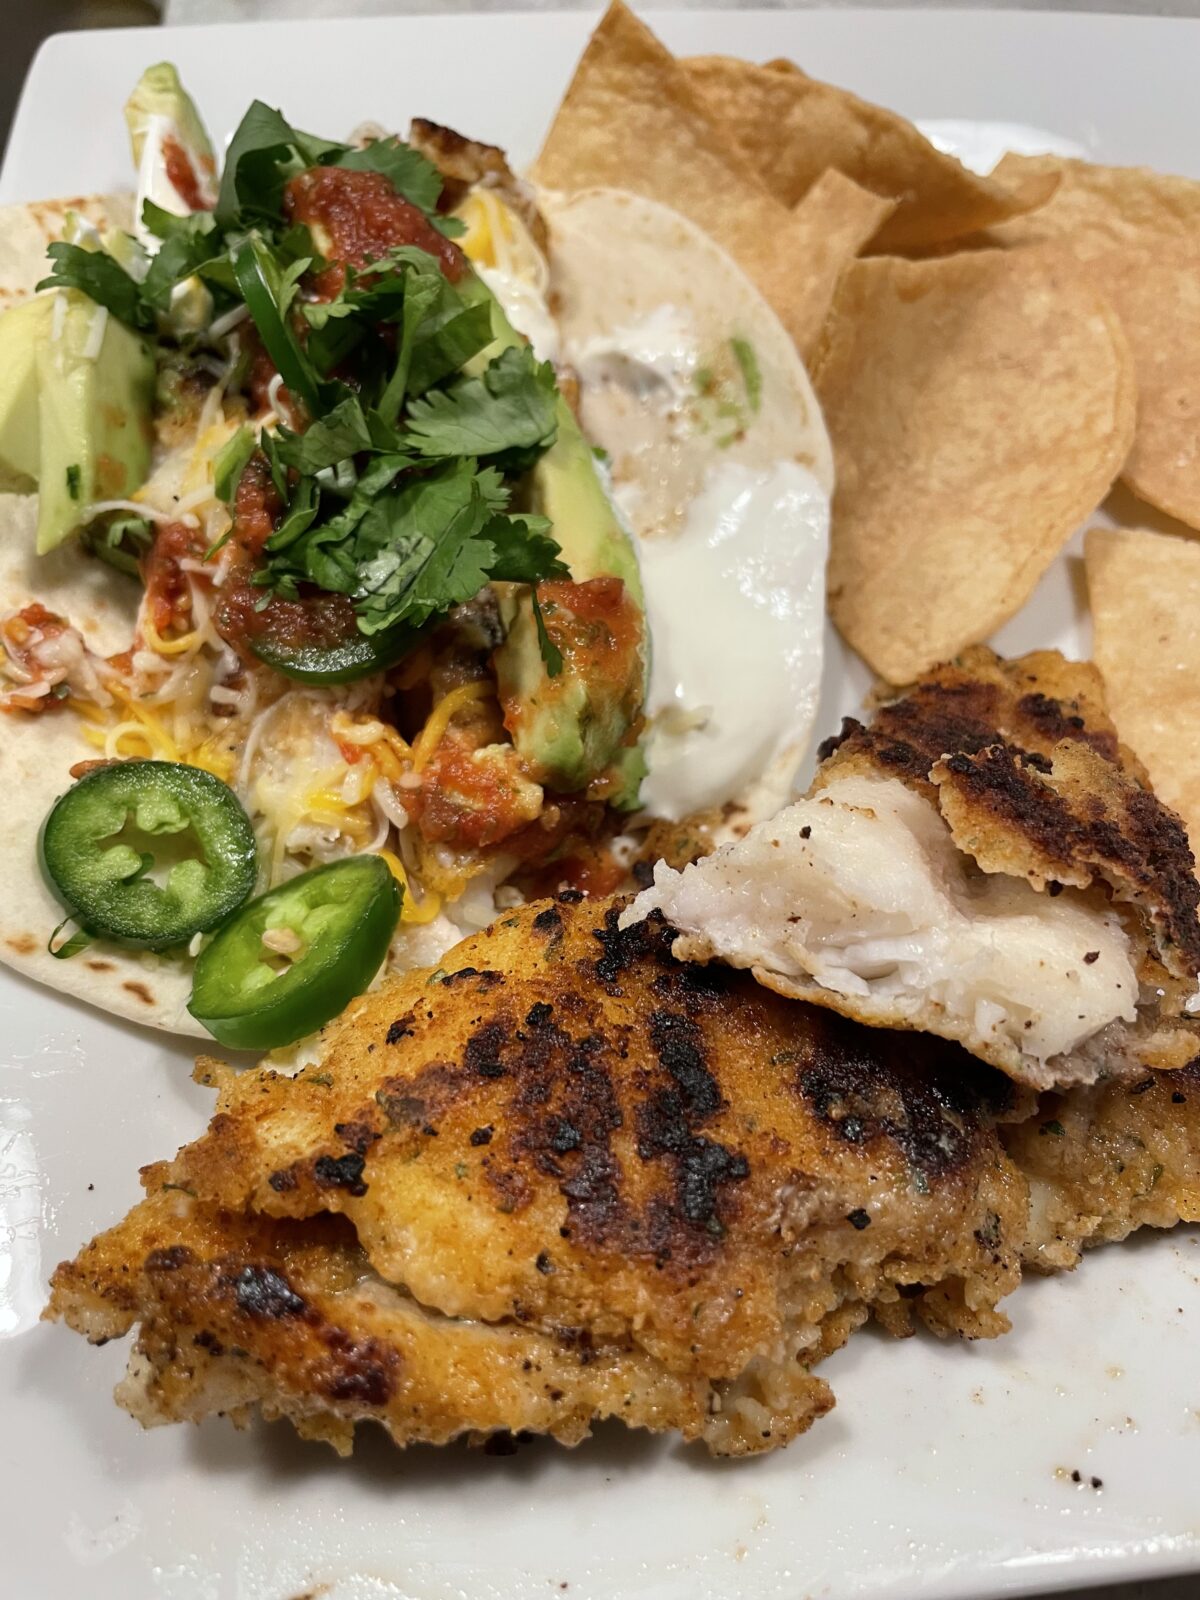 An image of a fried blue catfish taco on a plate